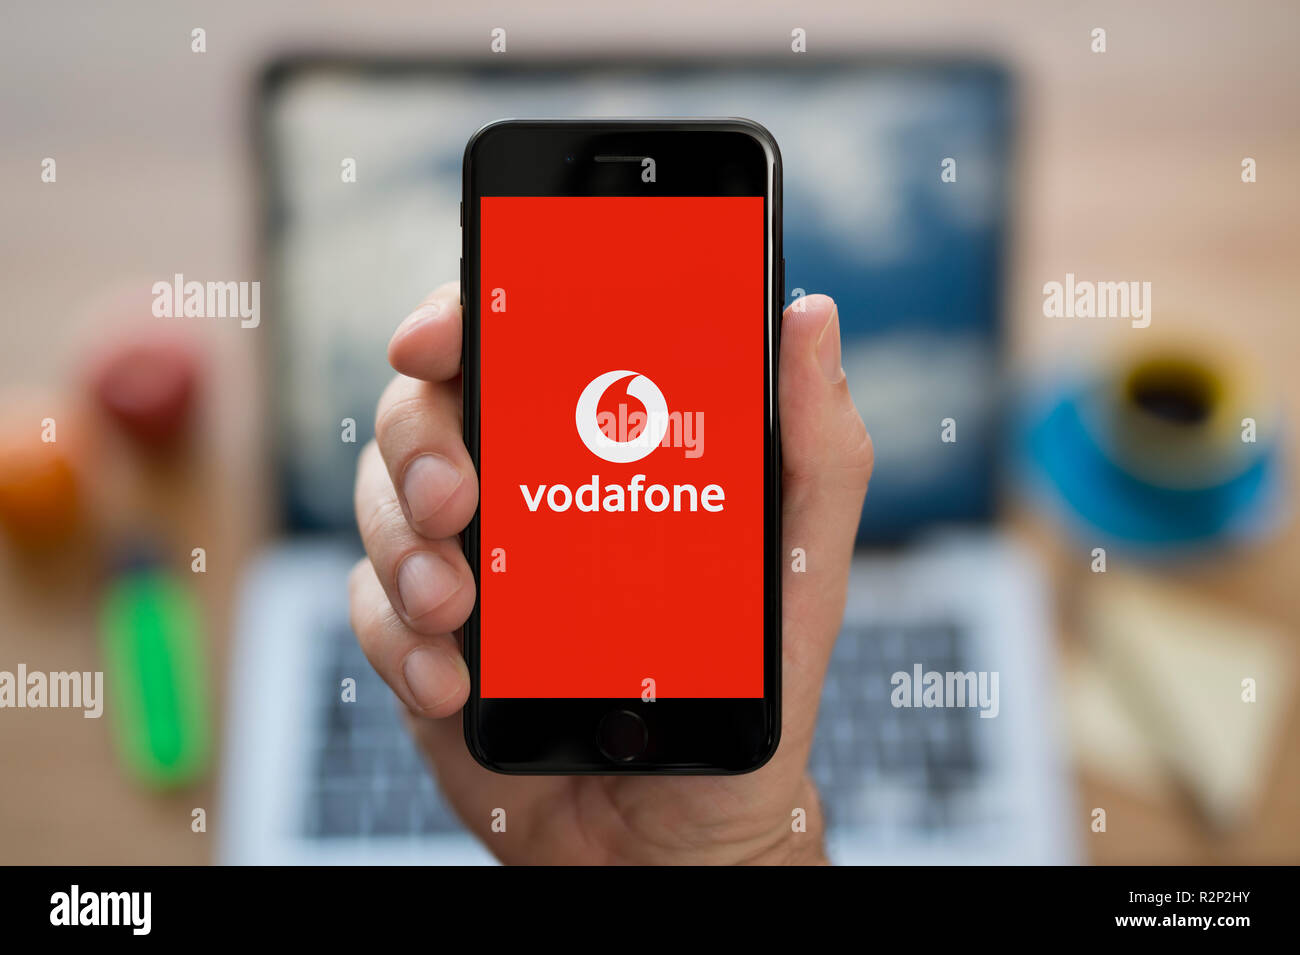 A man looks at his iPhone which displays the Vodafone logo, while sat at his computer desk (Editorial use only). Stock Photo